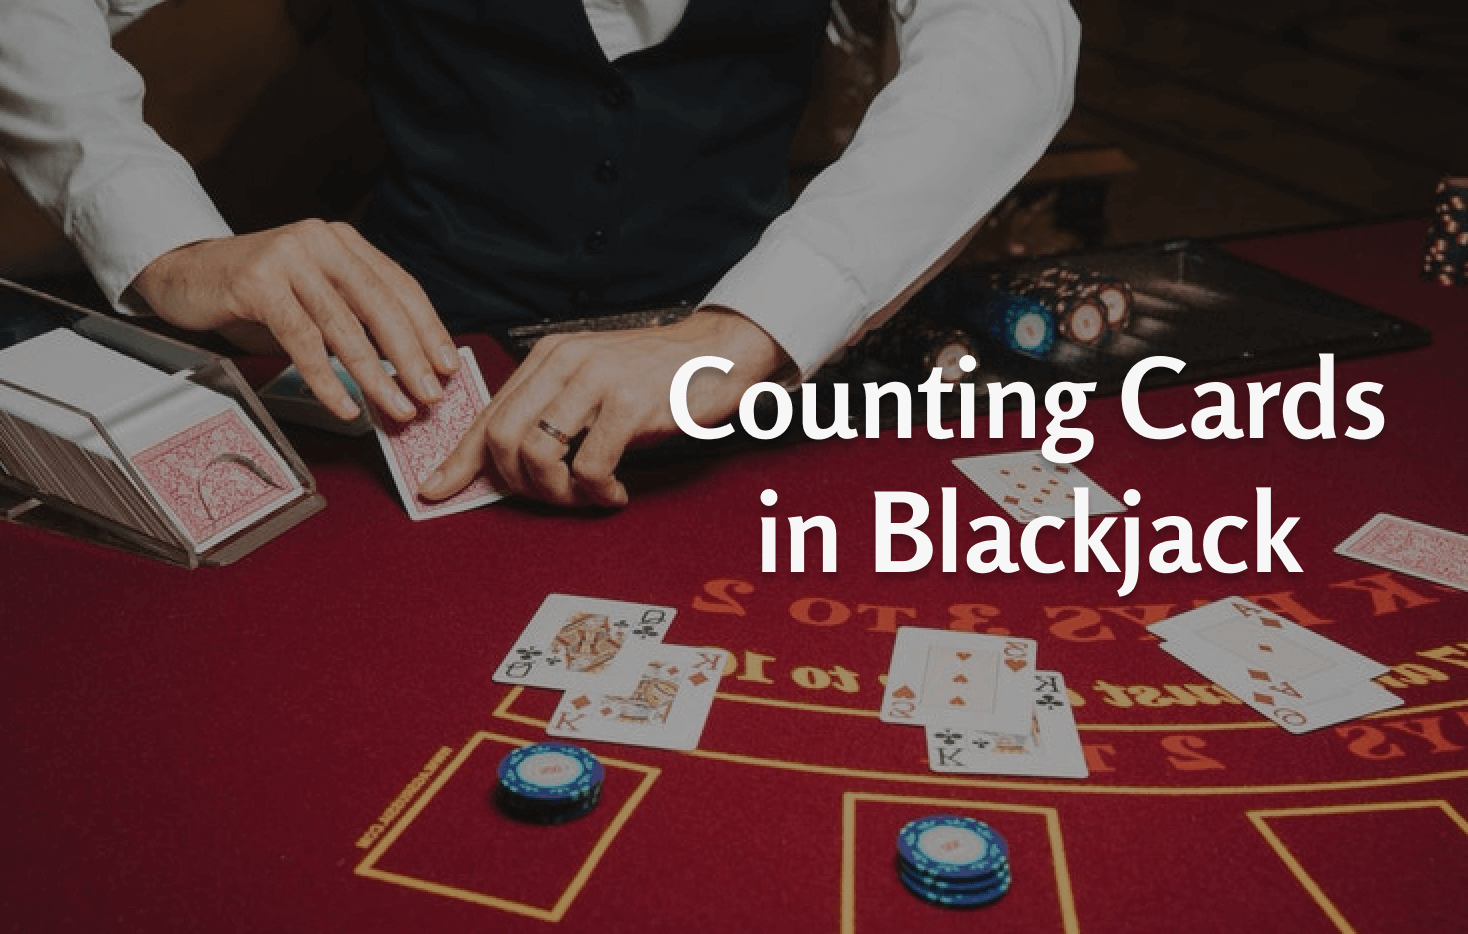 How to Count Cards in Blackjack: Step-by-Step Guide